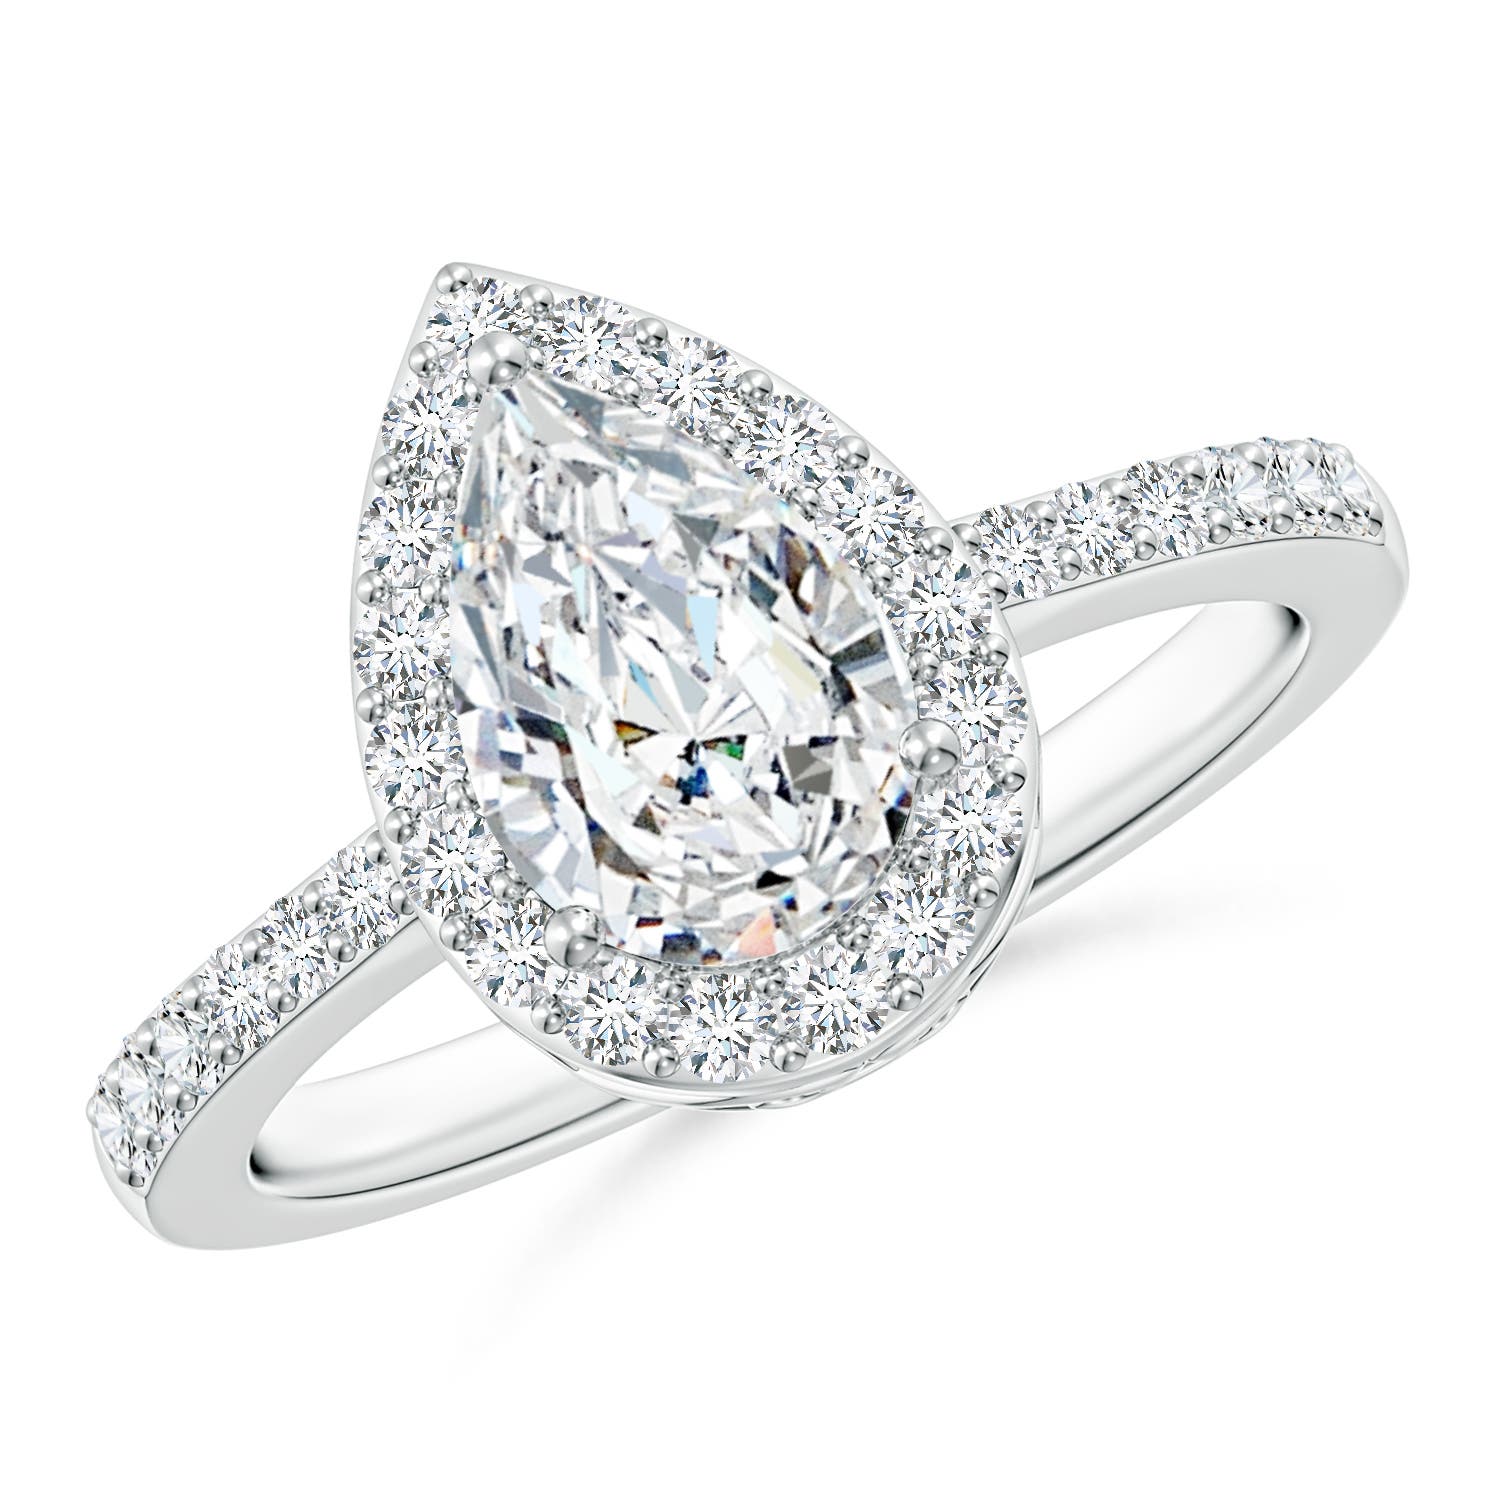 Lab-Grown Pear Diamond Ring with Halo